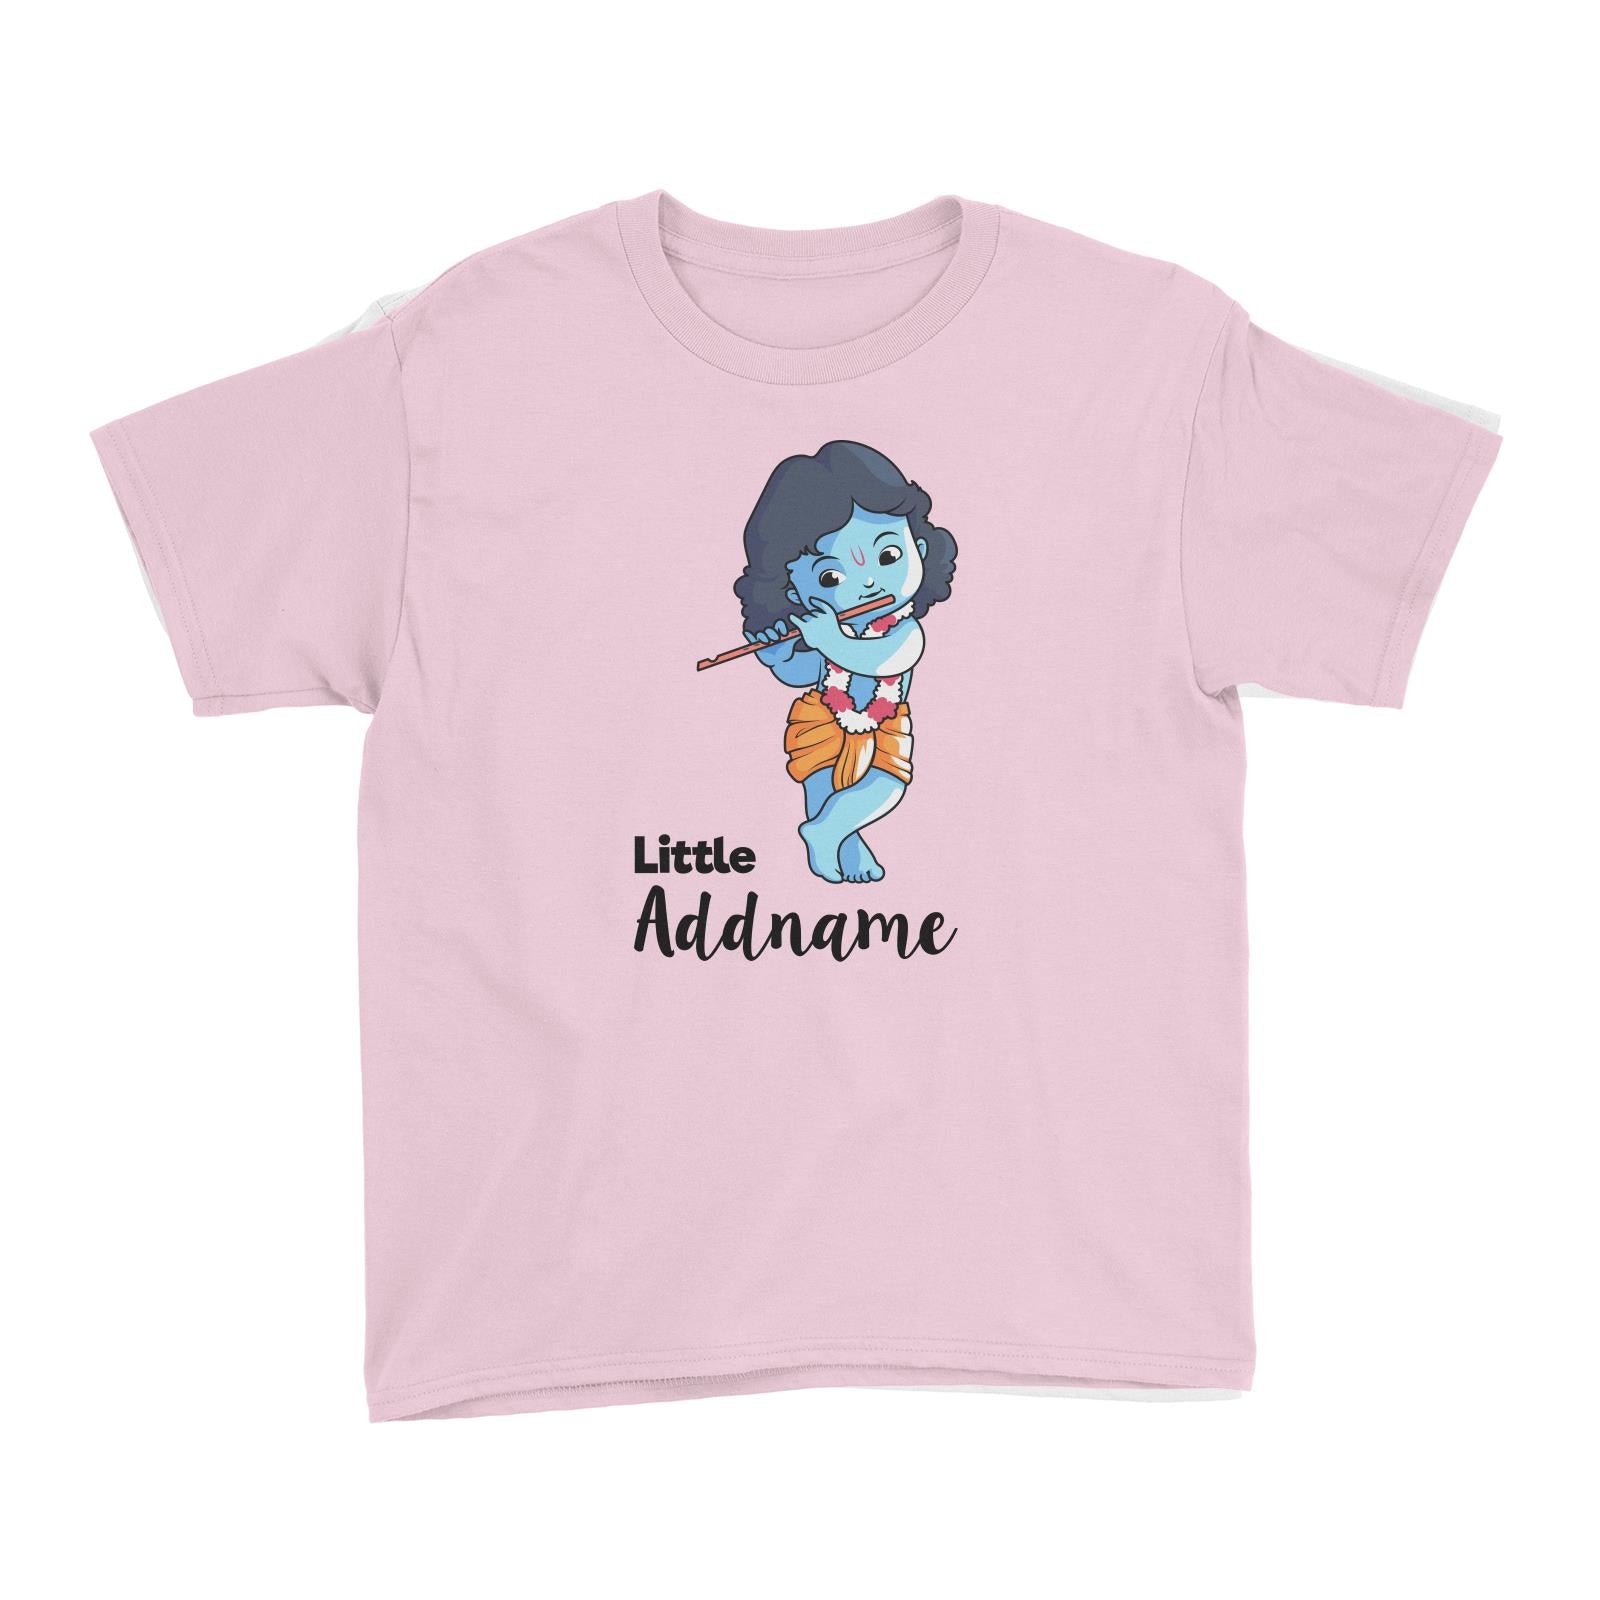 Cute Krishna With Flower Garland Playing Flute Little Addname Kid's T-Shirt